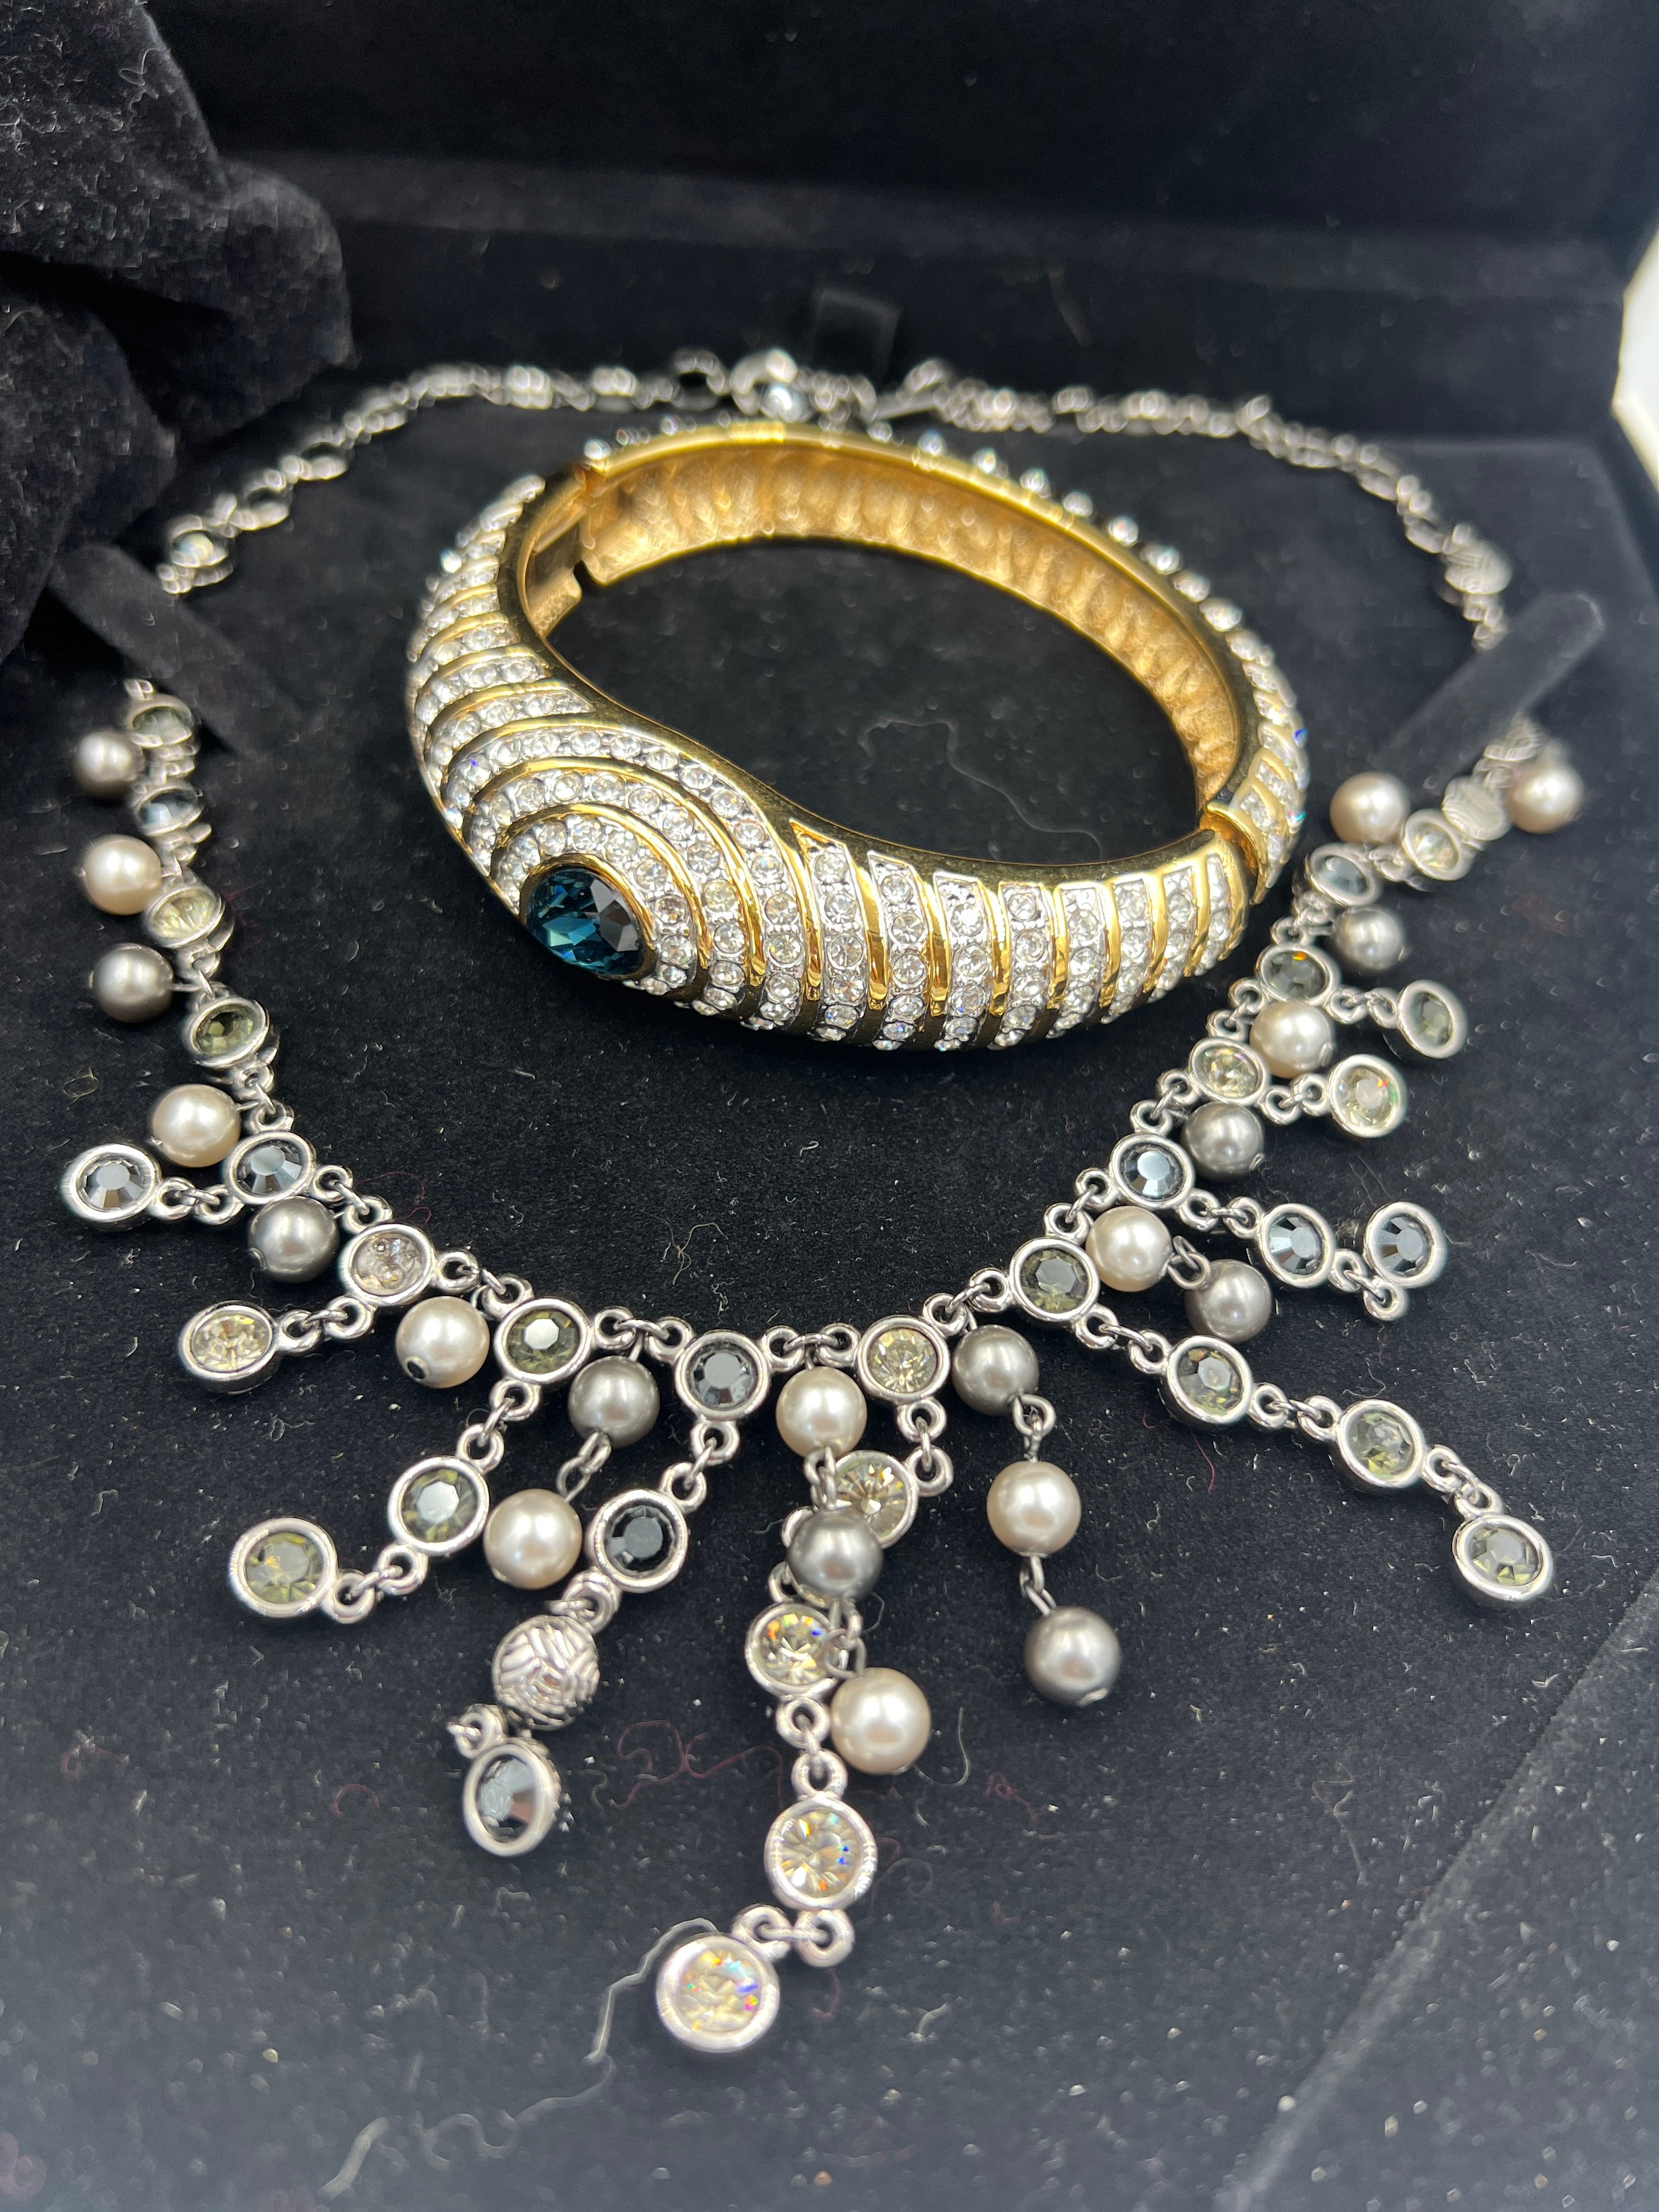 Vintage Swarovski necklace in original case and box together with a Swarovski hinged bangle in - Image 2 of 3